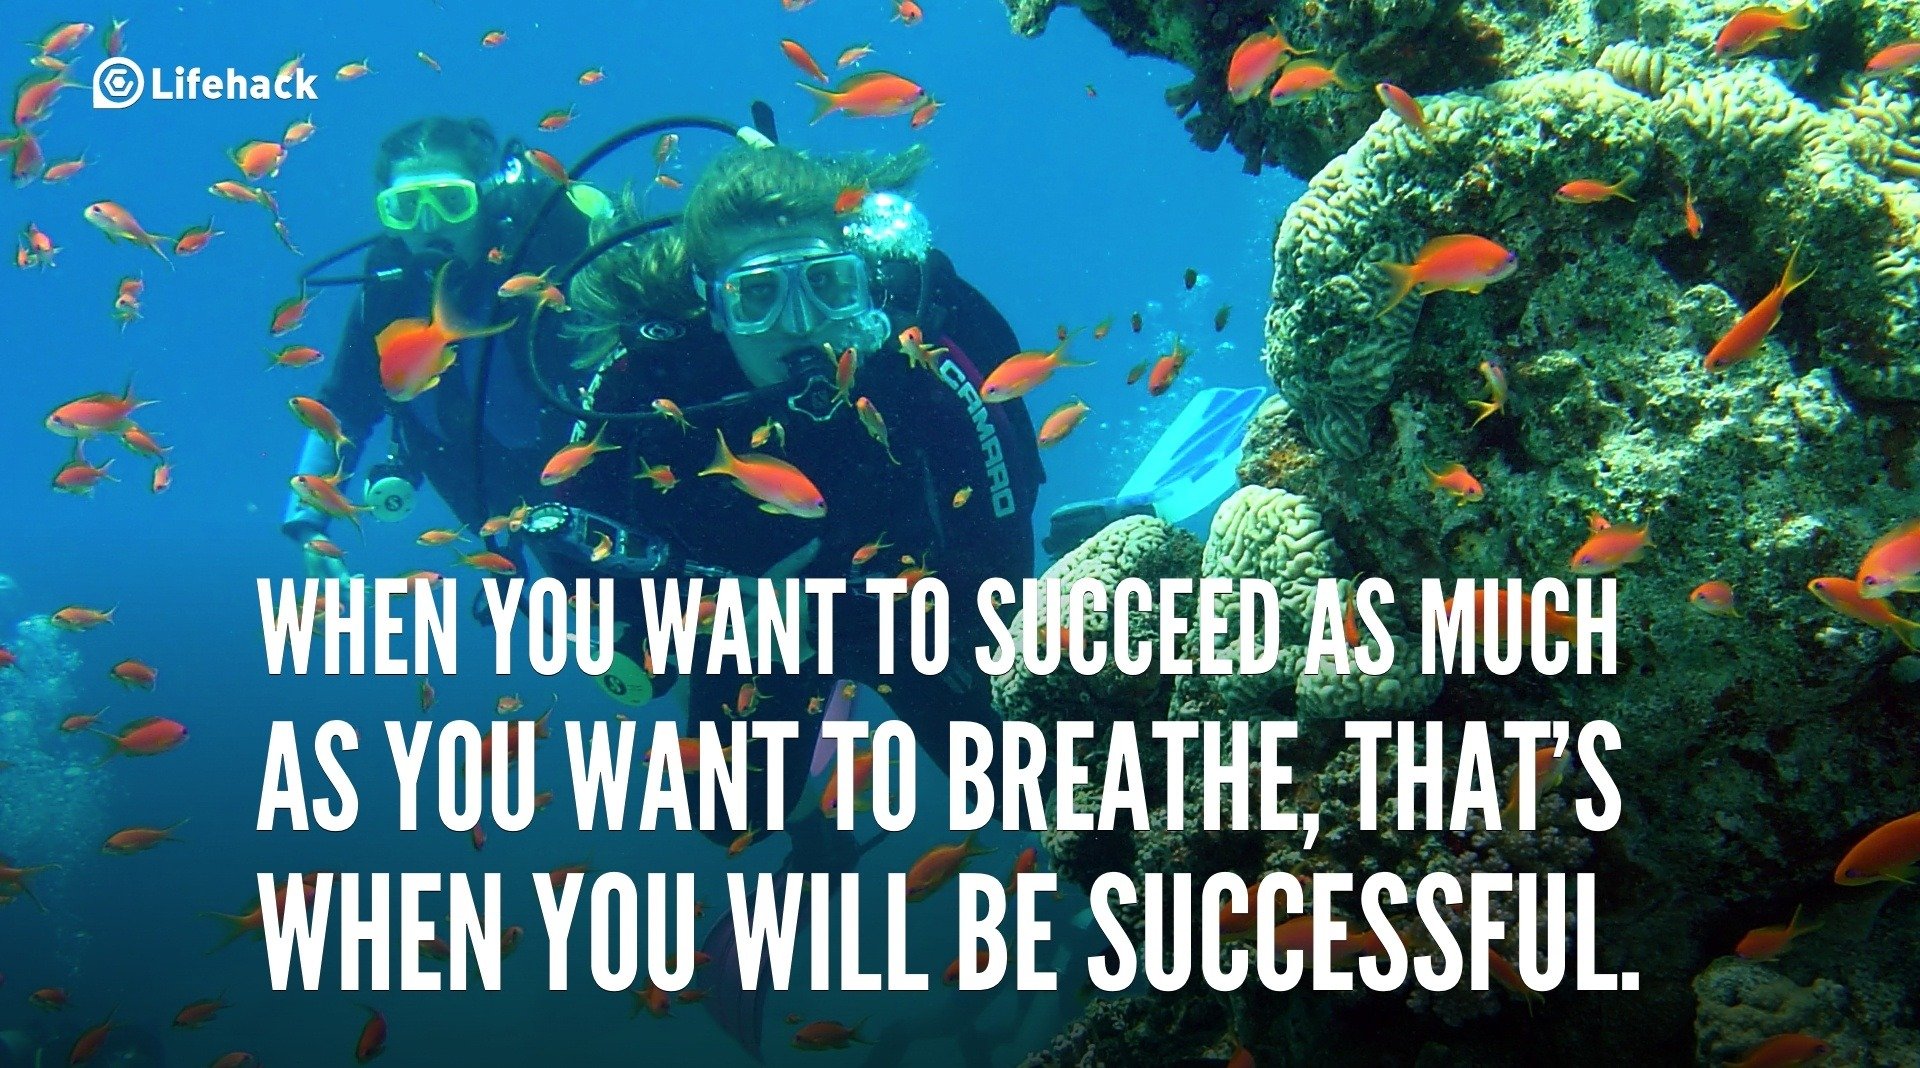 When you want to succeed as much as you want to breathe